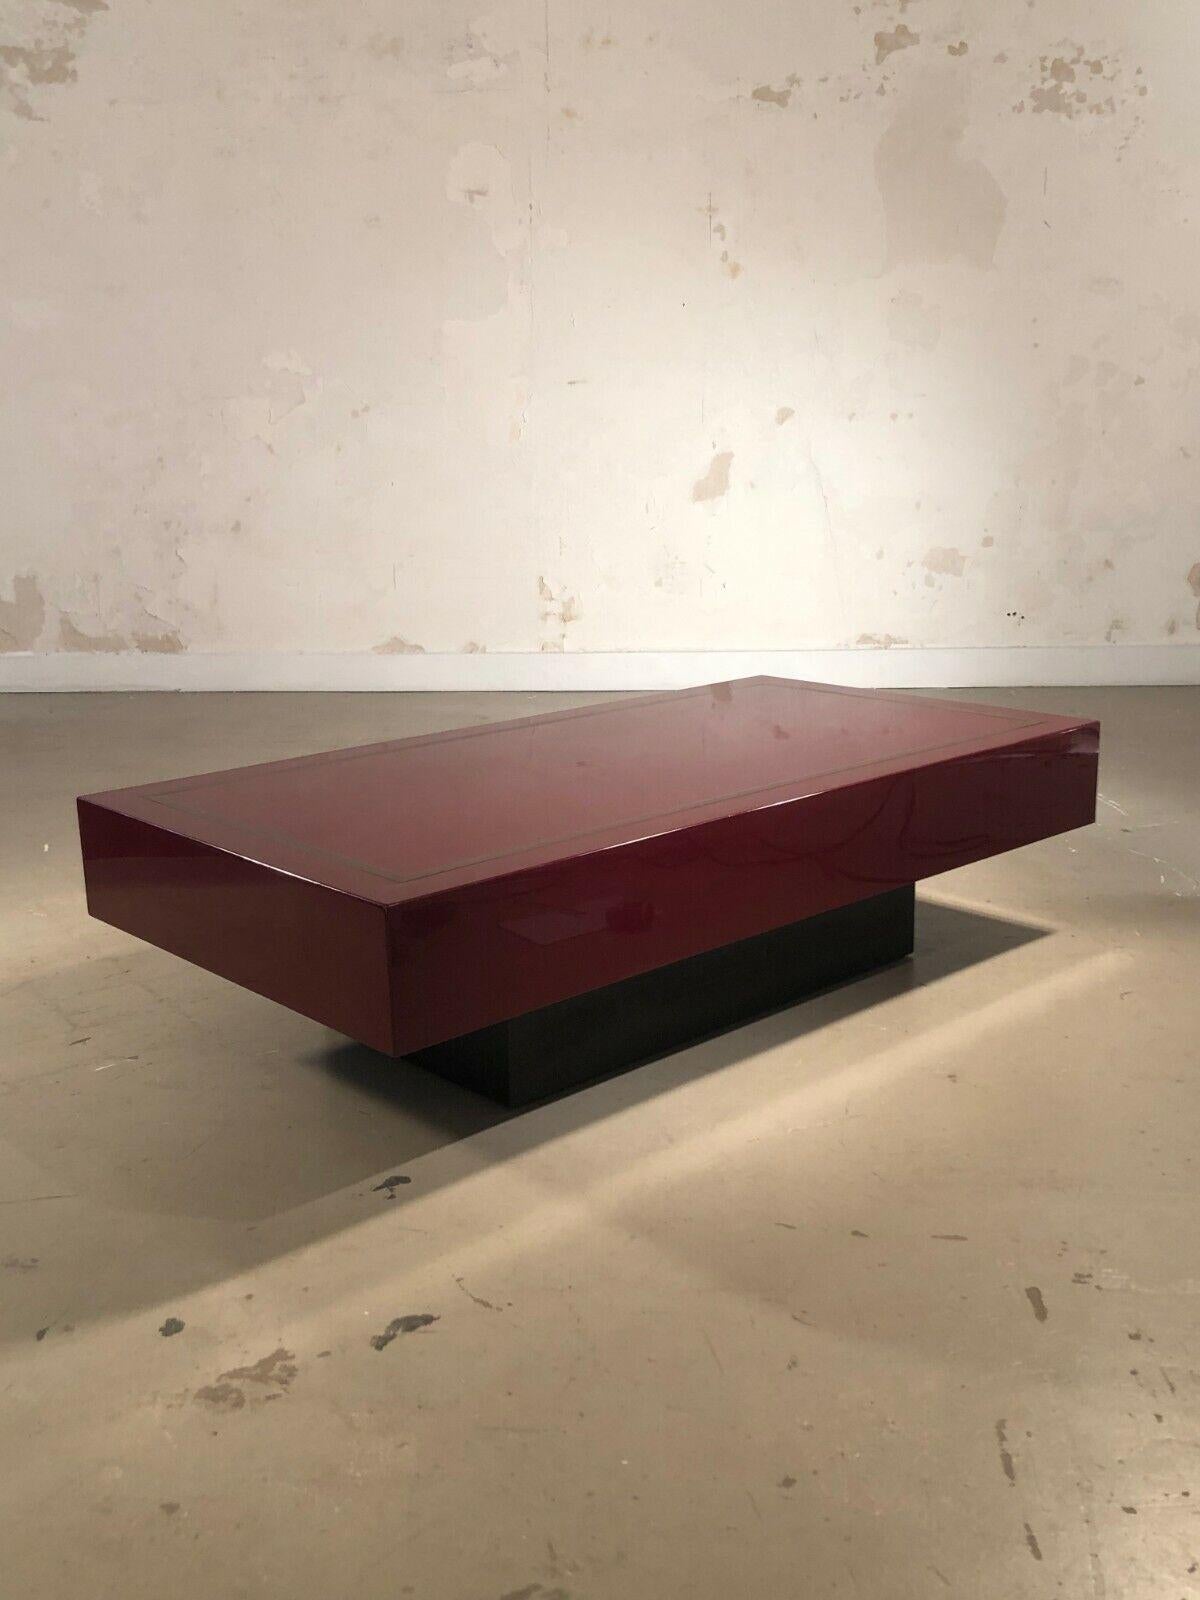 Late 20th Century A NEOCLASSICAL SHABBY-CHIC Lacquer COFFEE TABLE by JEAN-CLAUDE MAHEY France 1970 For Sale